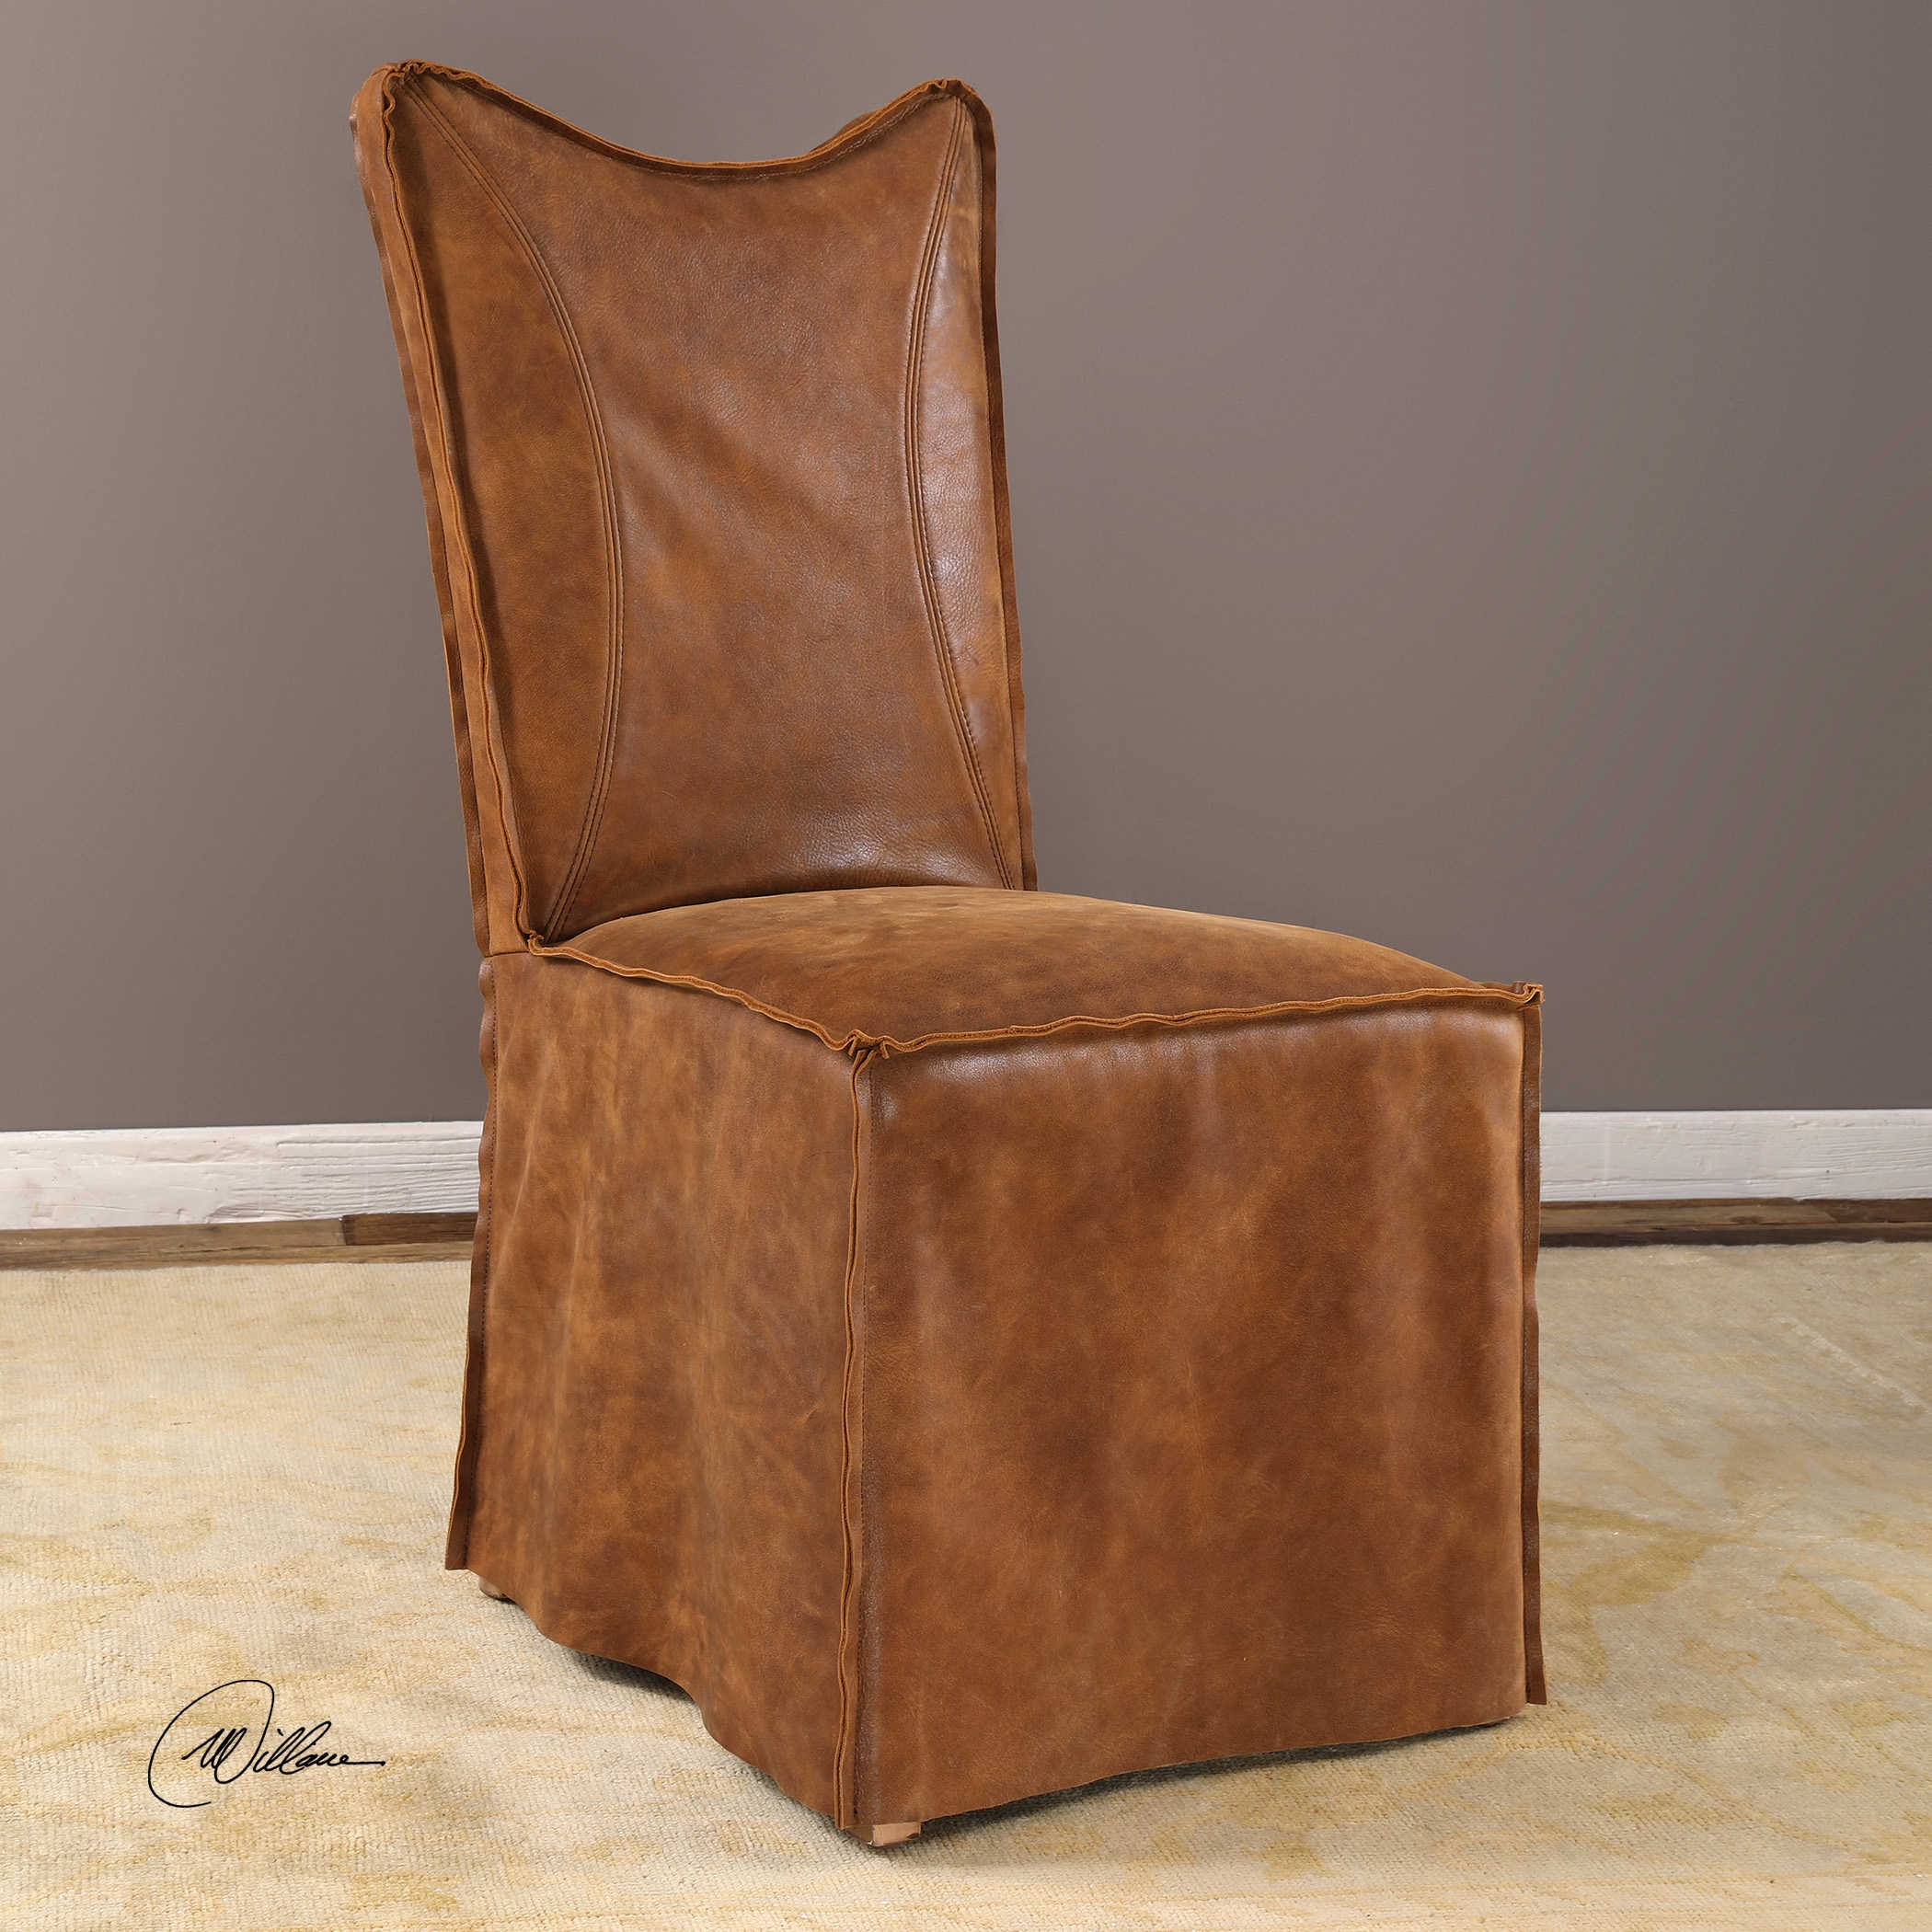 Delroy Armless Chairs, Cognac, Set Of 2 - Image 2